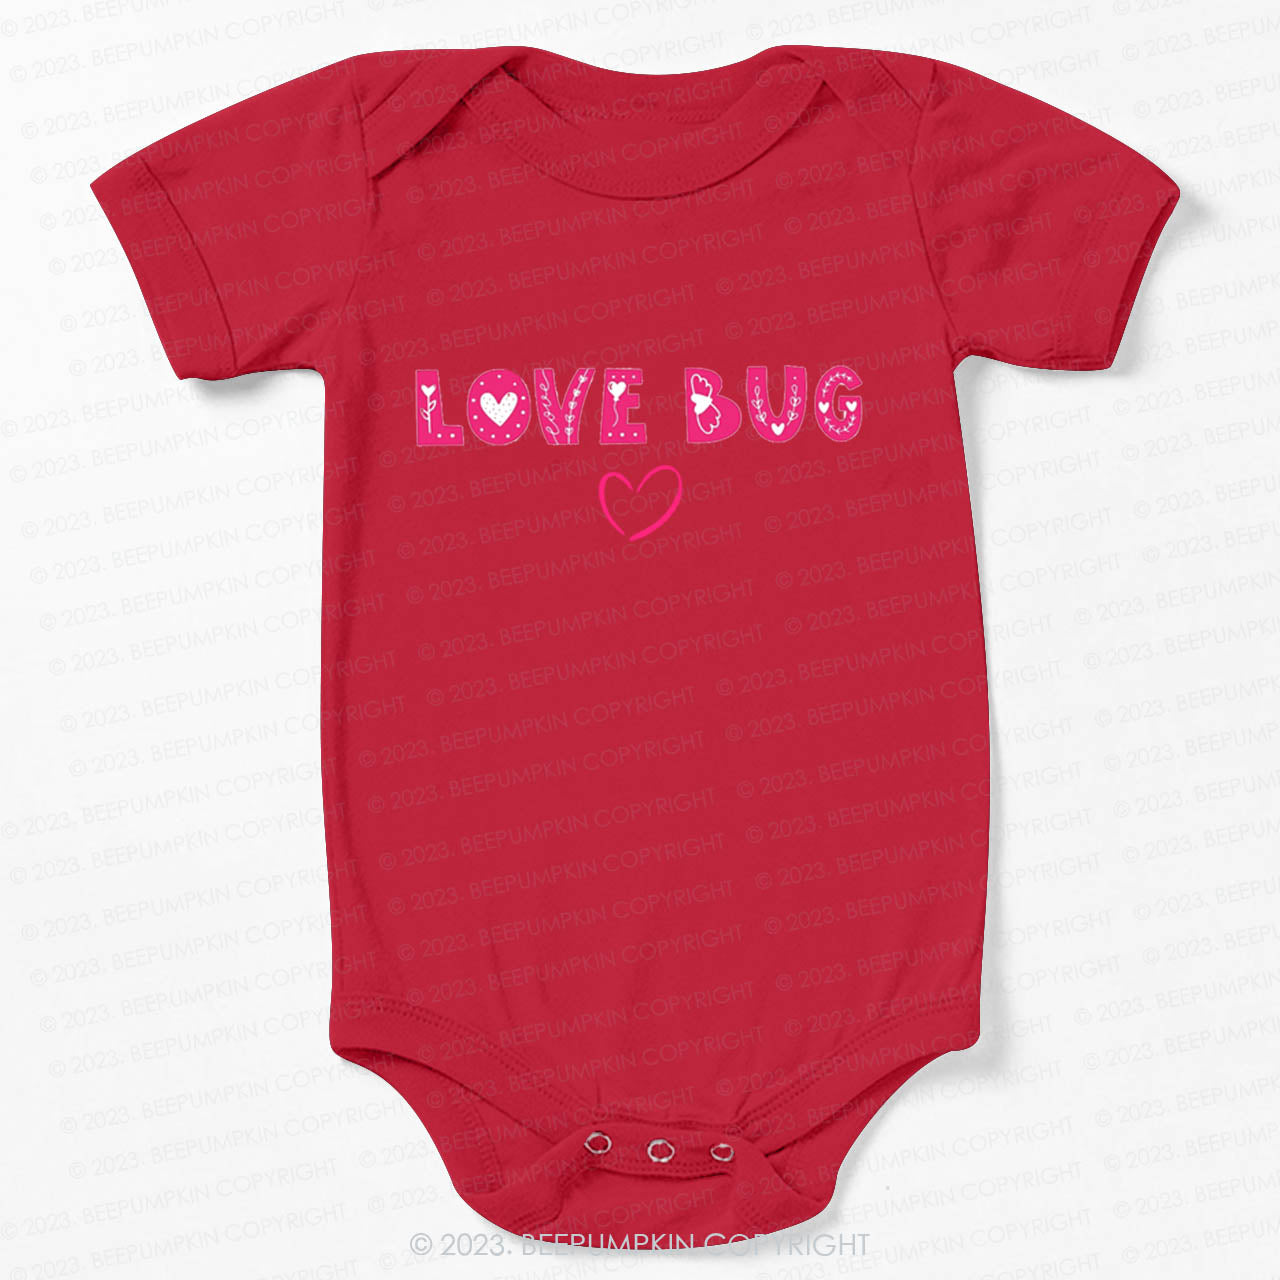 Love Bug Cute Happy Valentines Day Bodysuit For Baby